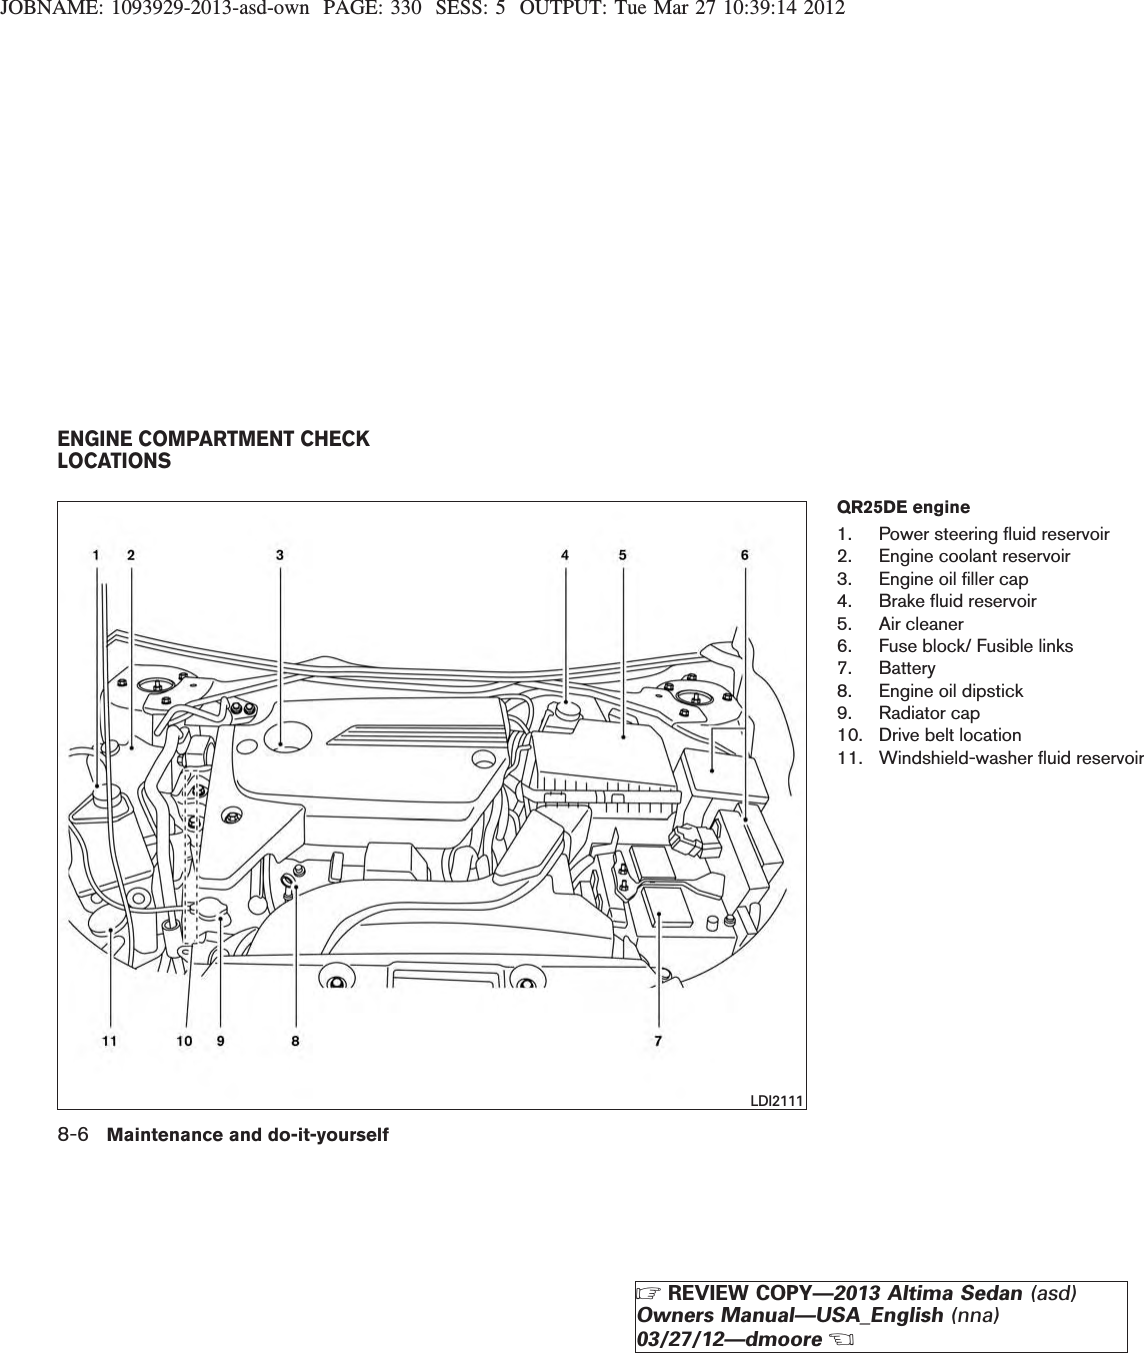 JOBNAME: 1093929-2013-asd-own PAGE: 330 SESS: 5 OUTPUT: Tue Mar 27 10:39:14 2012QR25DE engine1. Power steering fluid reservoir2. Engine coolant reservoir3. Engine oil filler cap4. Brake fluid reservoir5. Air cleaner6. Fuse block/ Fusible links7. Battery8. Engine oil dipstick9. Radiator cap10. Drive belt location11. Windshield-washer fluid reservoirLDI2111ENGINE COMPARTMENT CHECKLOCATIONS8-6 Maintenance and do-it-yourselfZREVIEW COPY—2013 Altima Sedan (asd)Owners Manual—USA_English (nna)03/27/12—dmooreX